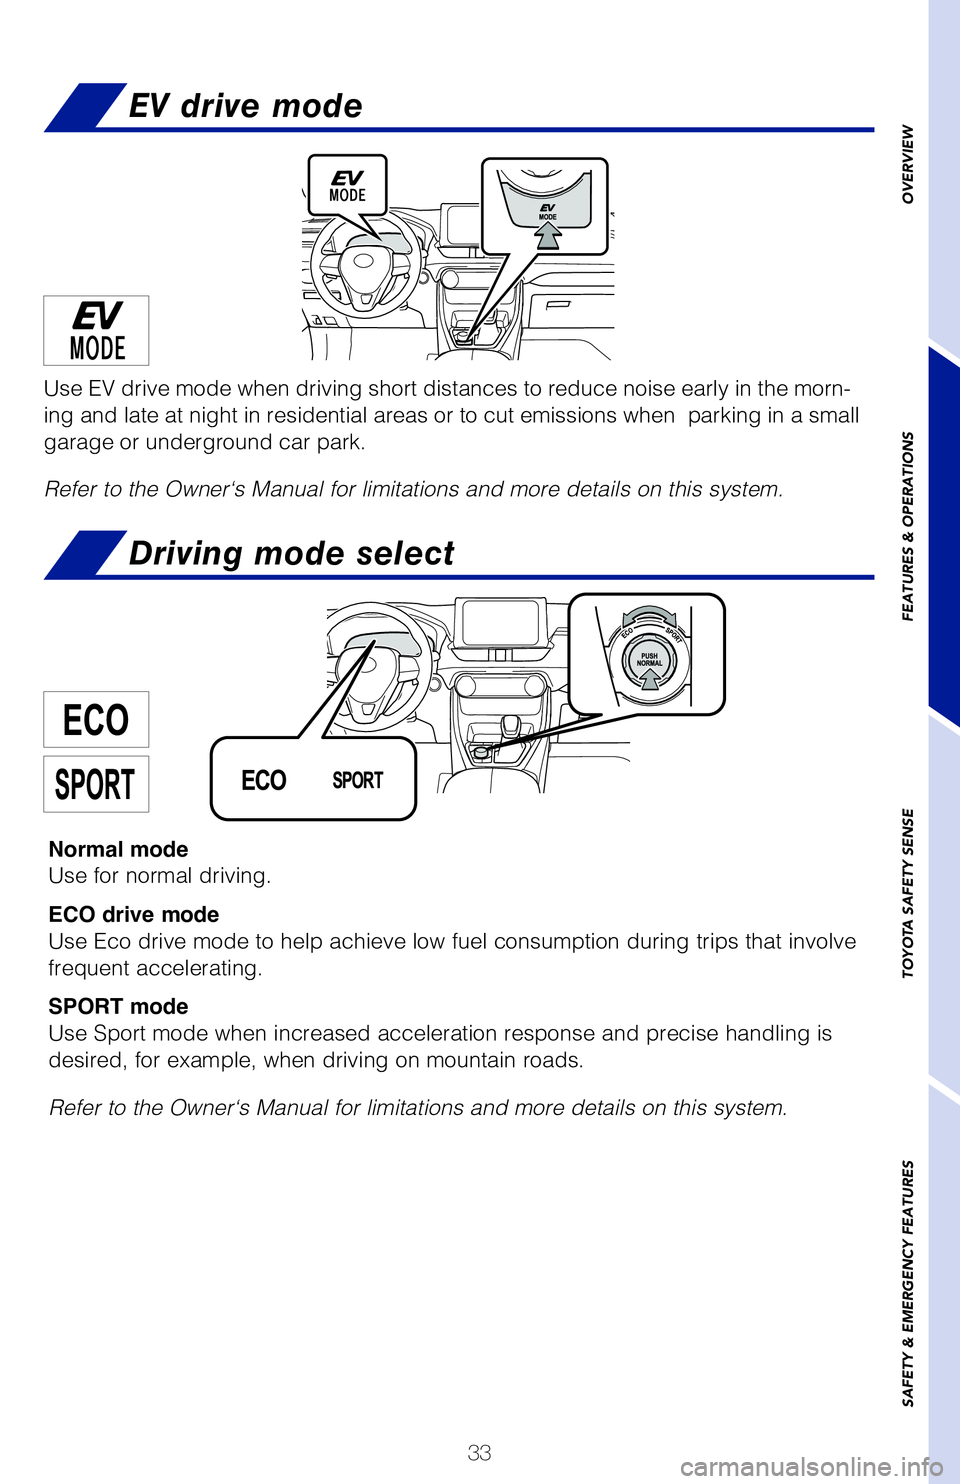 TOYOTA RAV4 HYBRID 2020  Owners Manual (in English) 33
OVERVIEW
FEATURES & OPERATIONS
TOYOTA SAFETY SENSE
SAFETY & EMERGENCY FEATURES
Use EV drive mode when driving short distances to reduce noise early in \
the morn-
ing and late at night in residenti